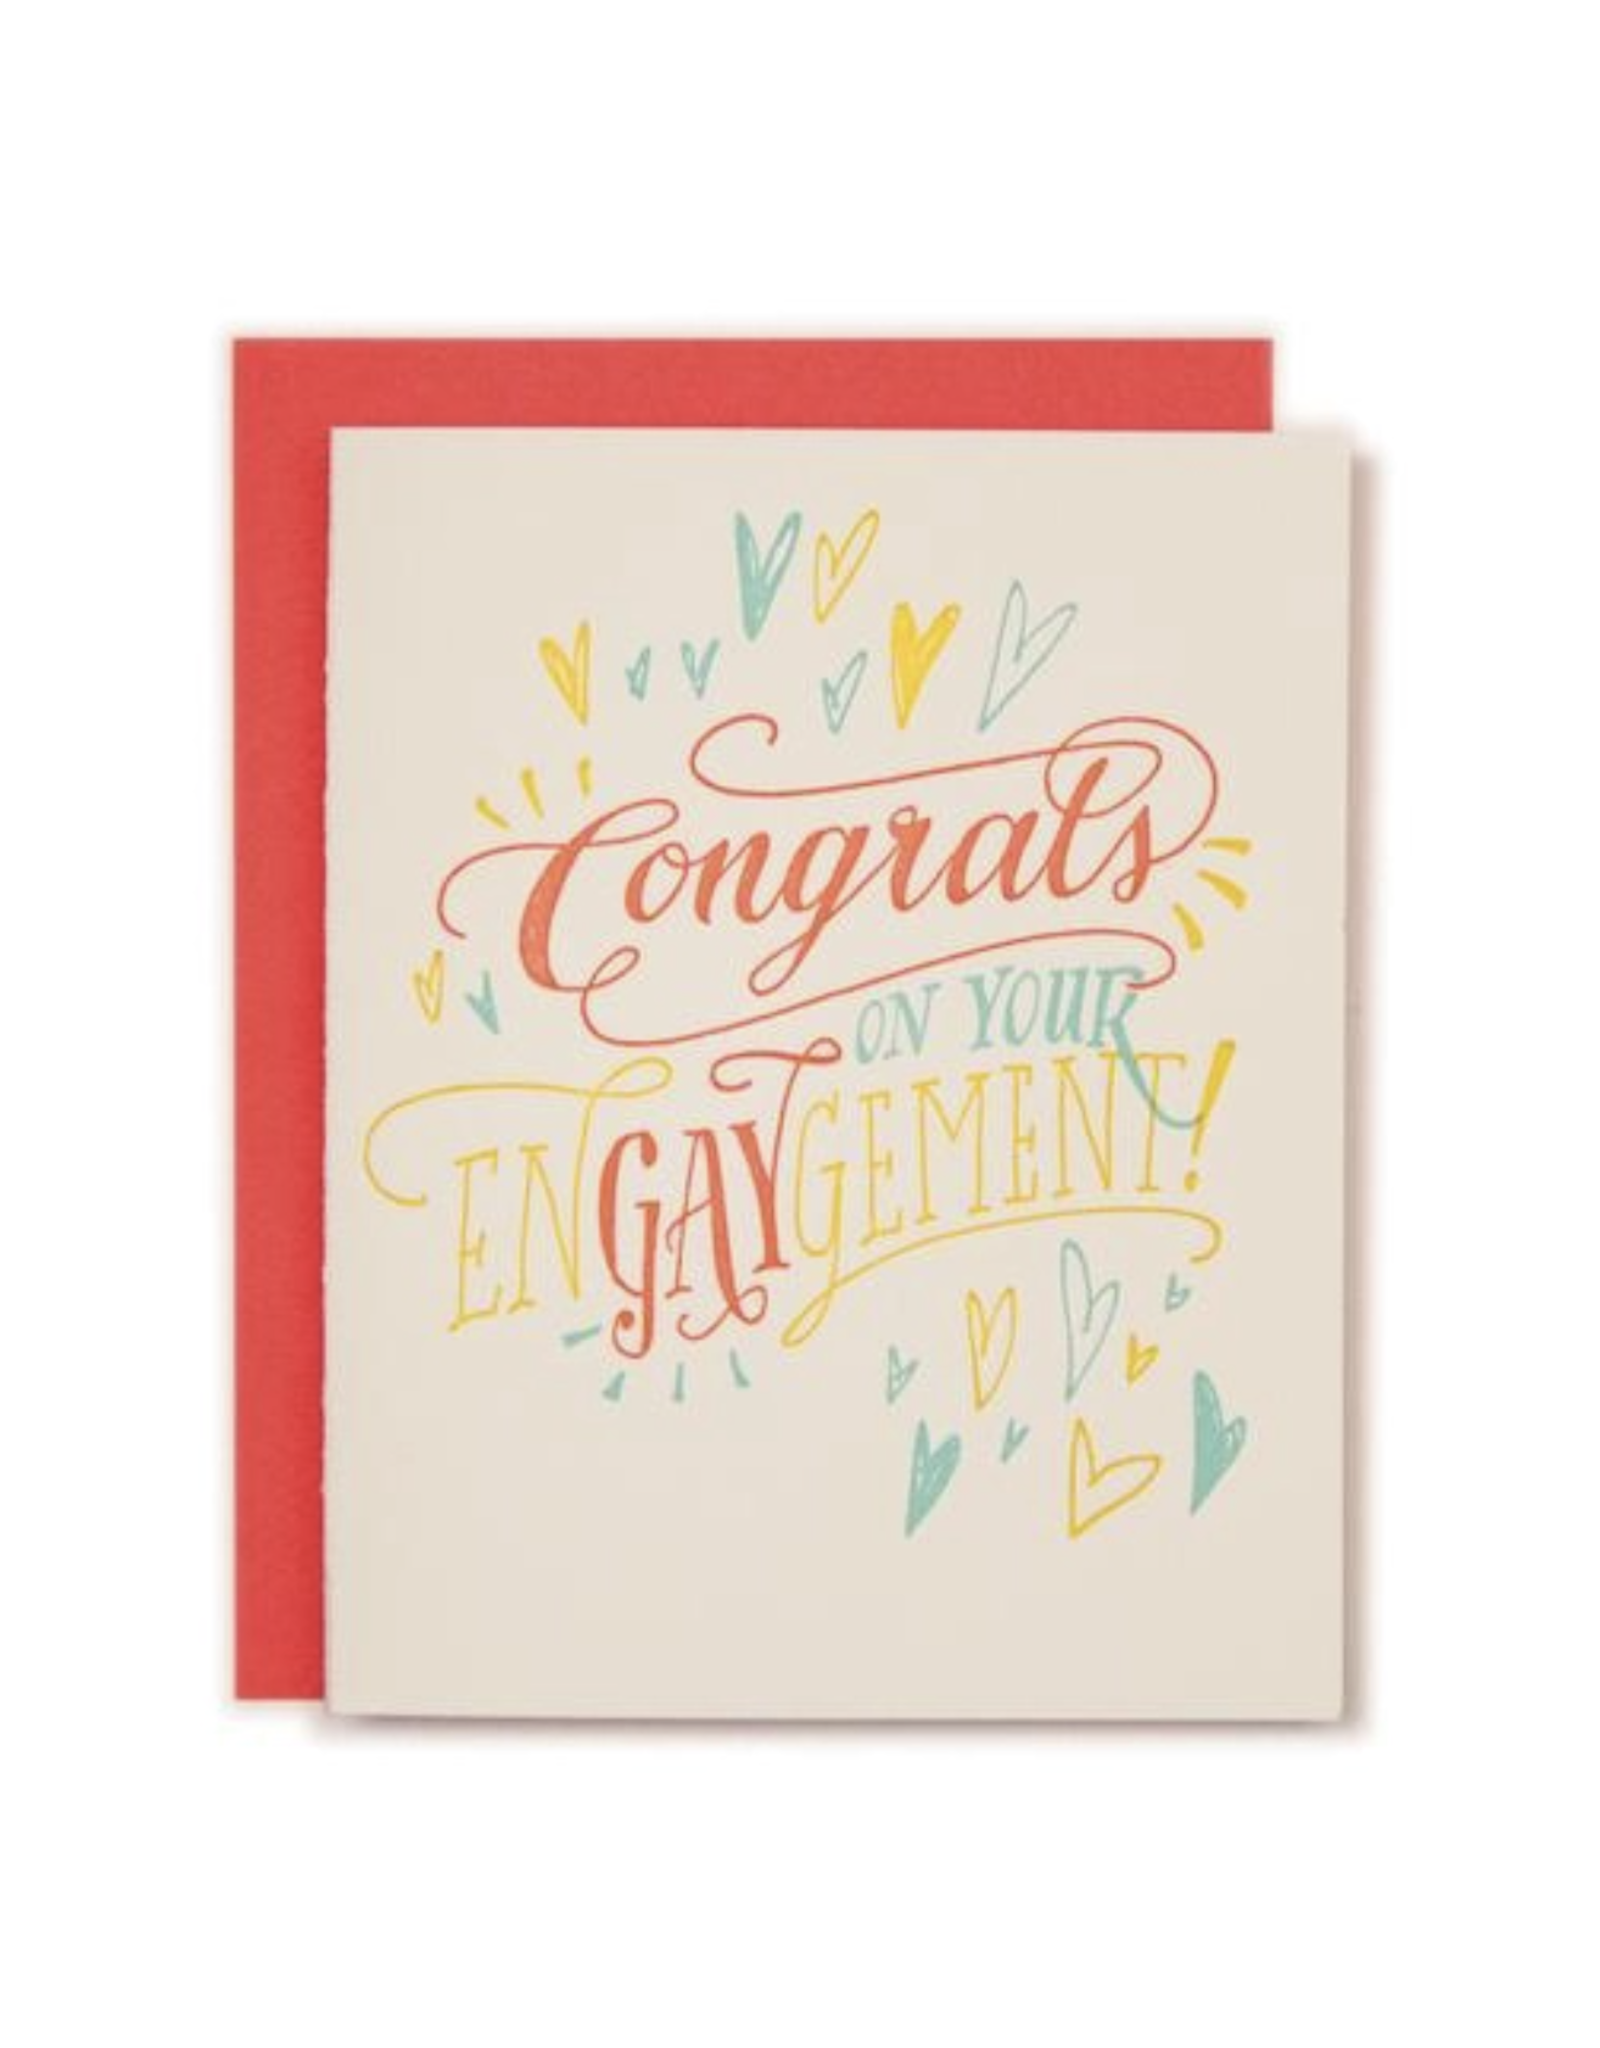 Ladyfingers Letterpress Congrats On Your Engaygement Card